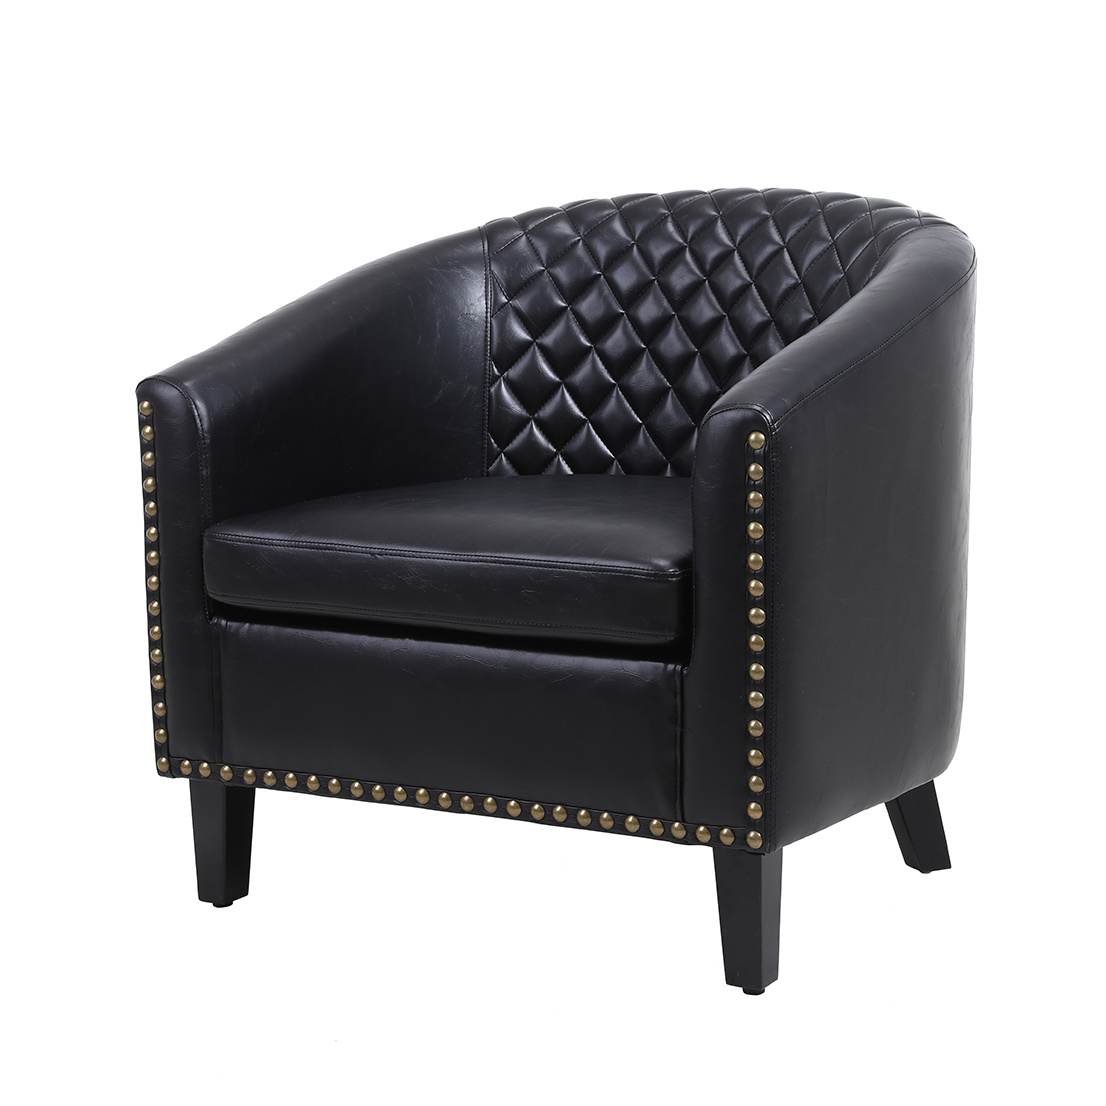 Black Faux Leather Armchair Club Chair Bucket Chair For Dining Living Room Office Reception PALDIN LEATHER TUB CHAIR 